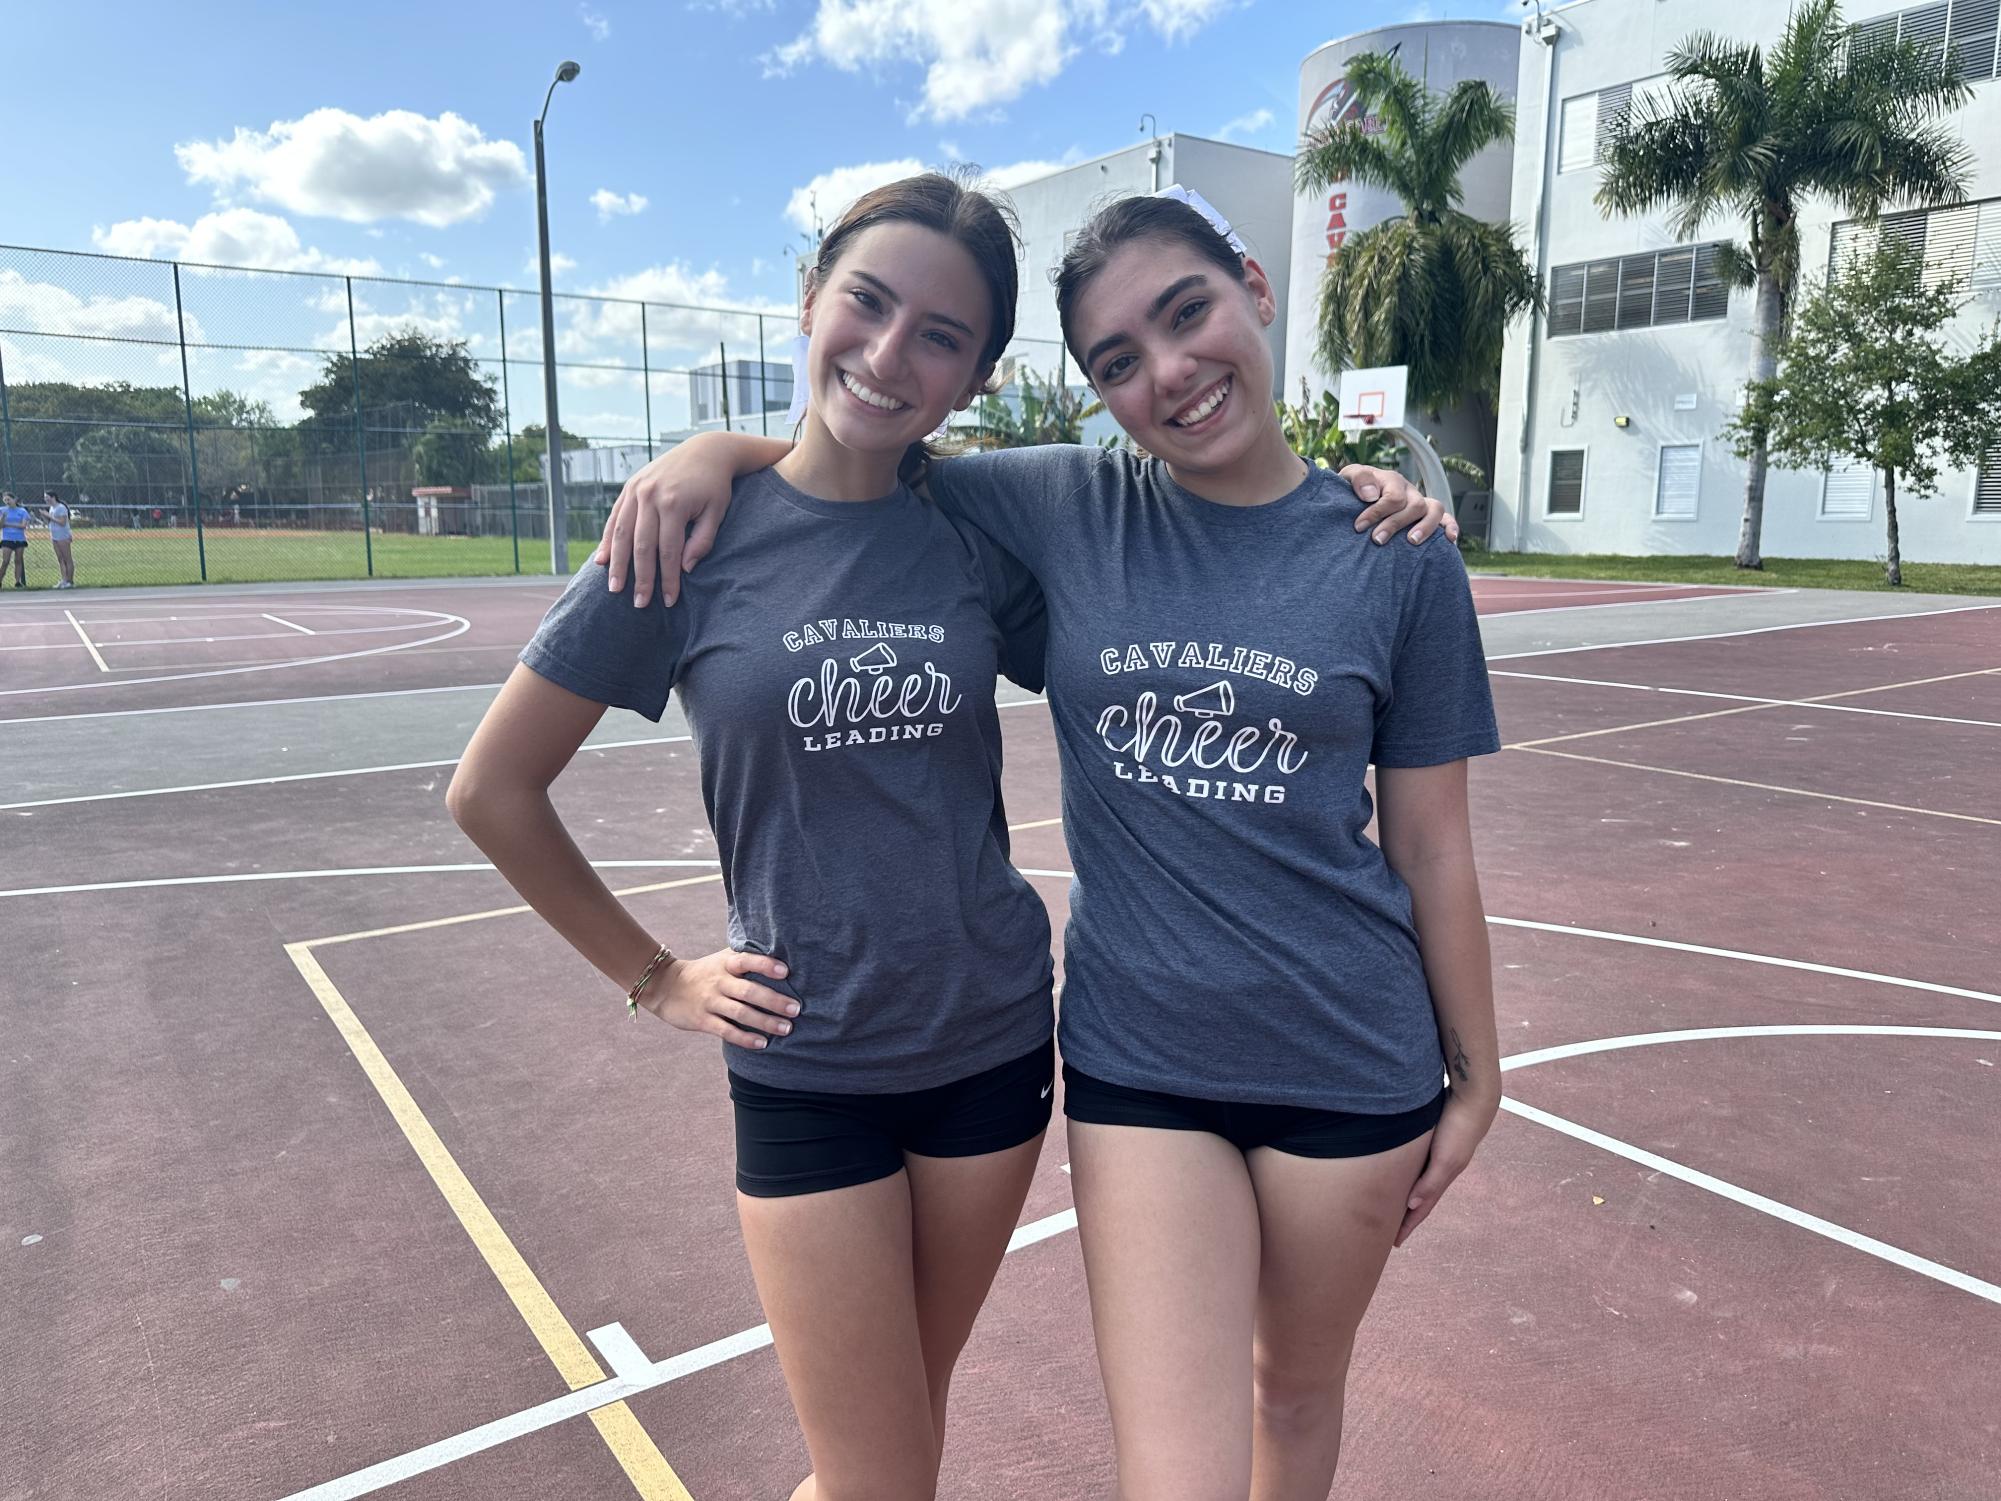 Both juniors, Chiara Ortiz de Rosas and Samira Martinez executed their skill at the first cheer practice of the season.